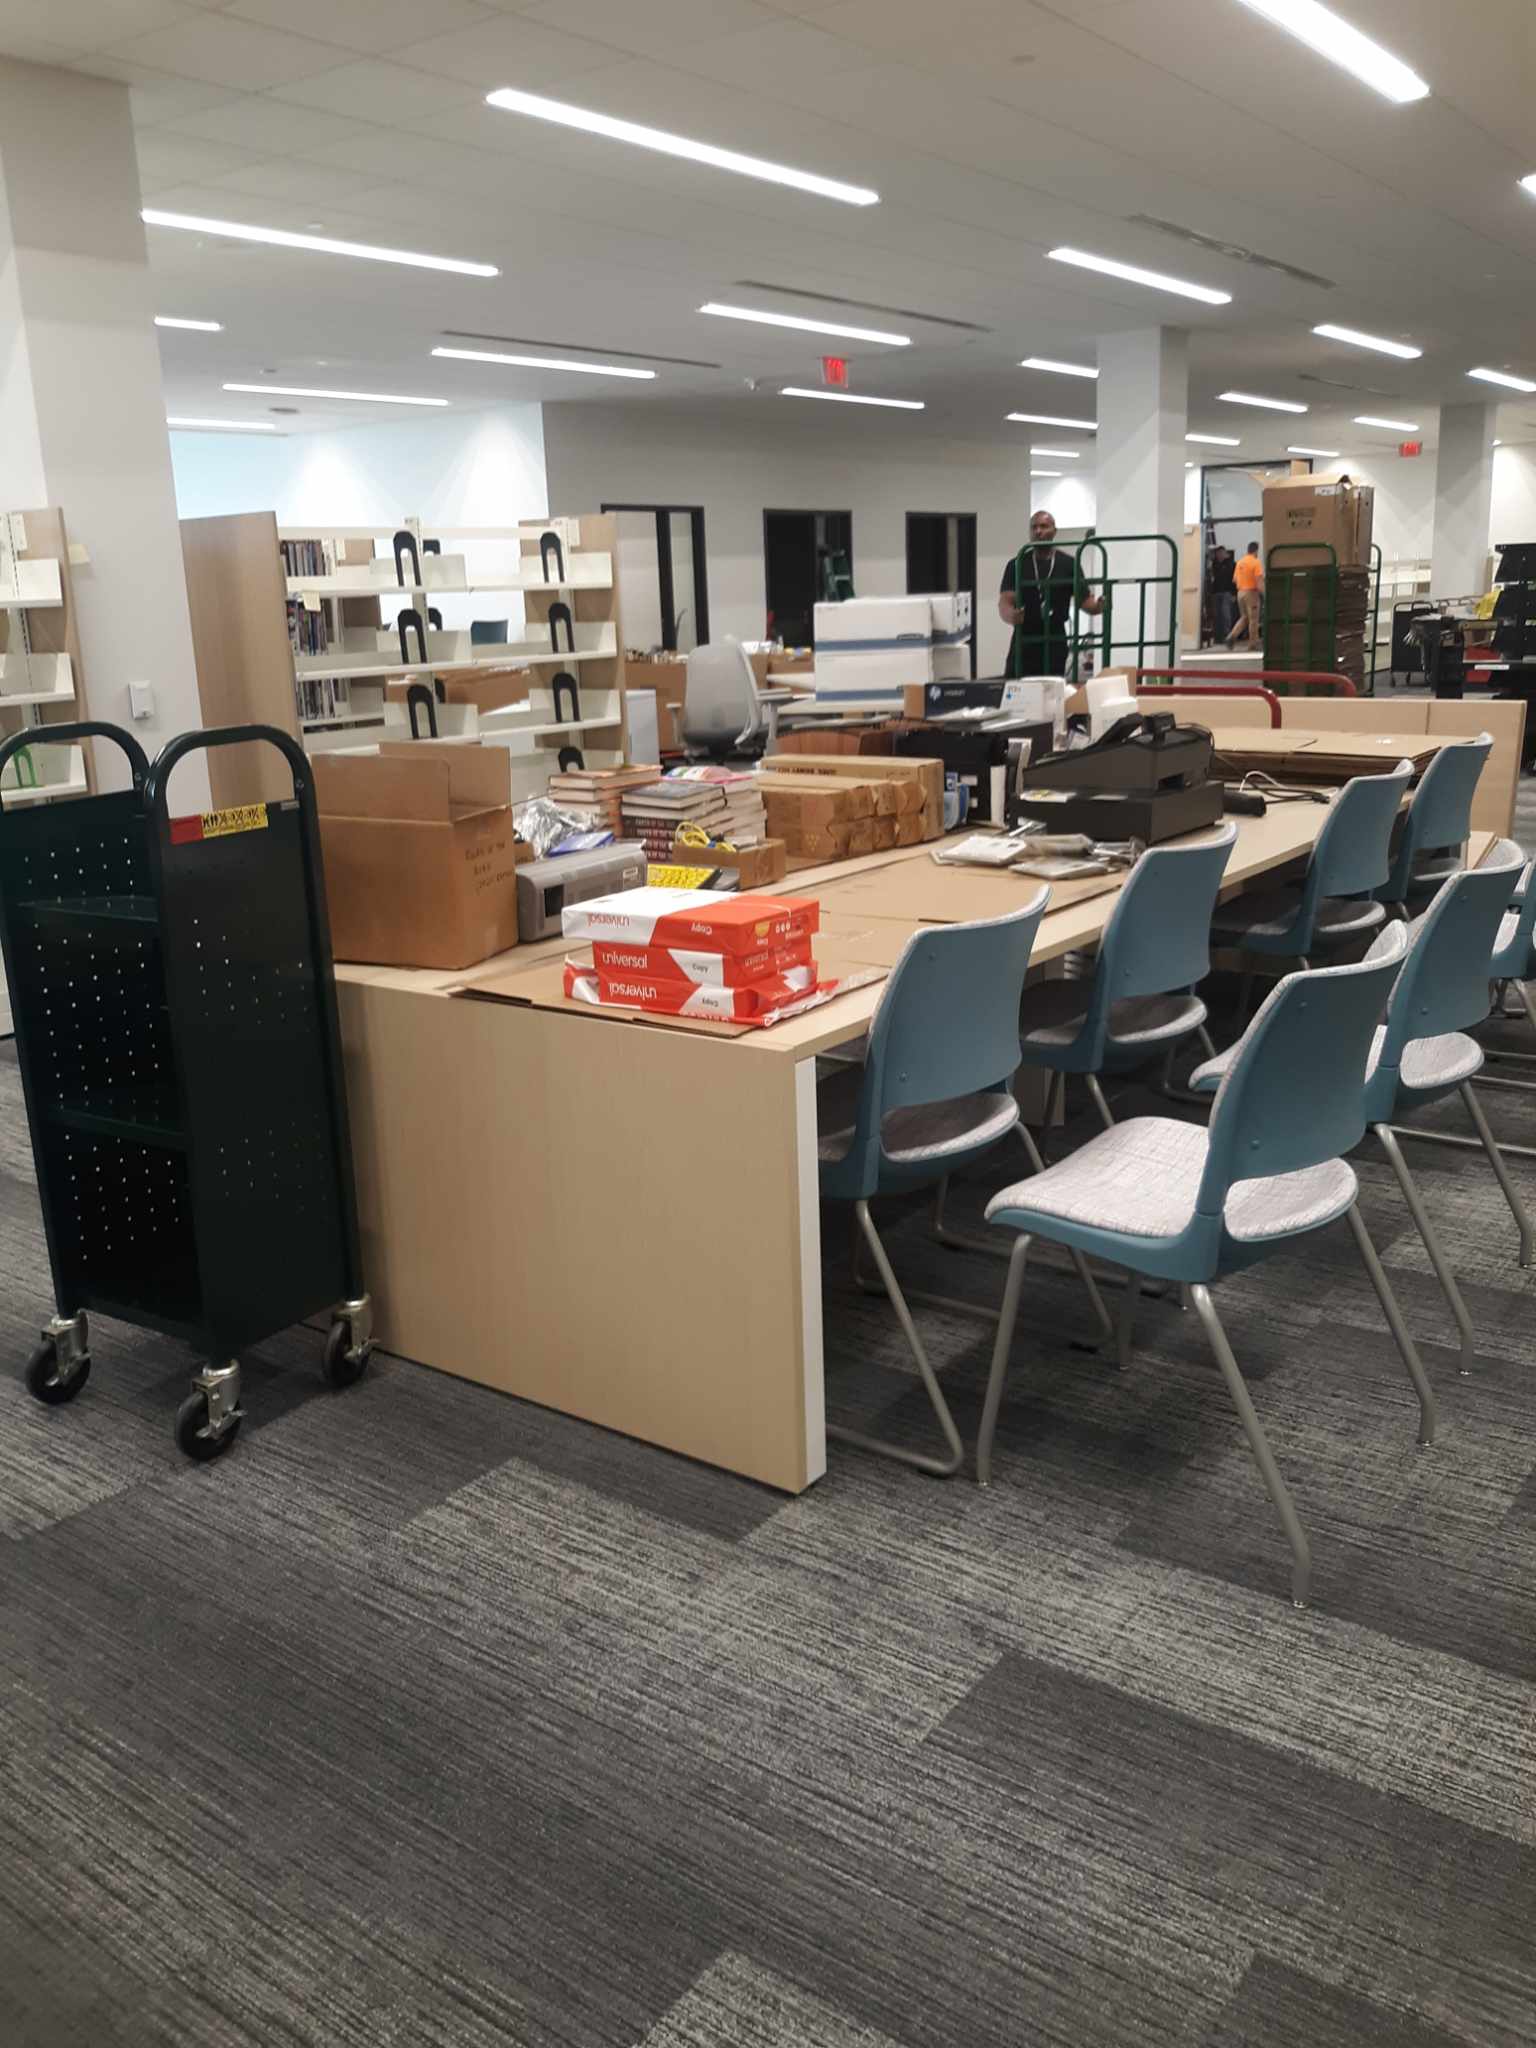 New Adult Services Computer Area being set up on the west side of the building.